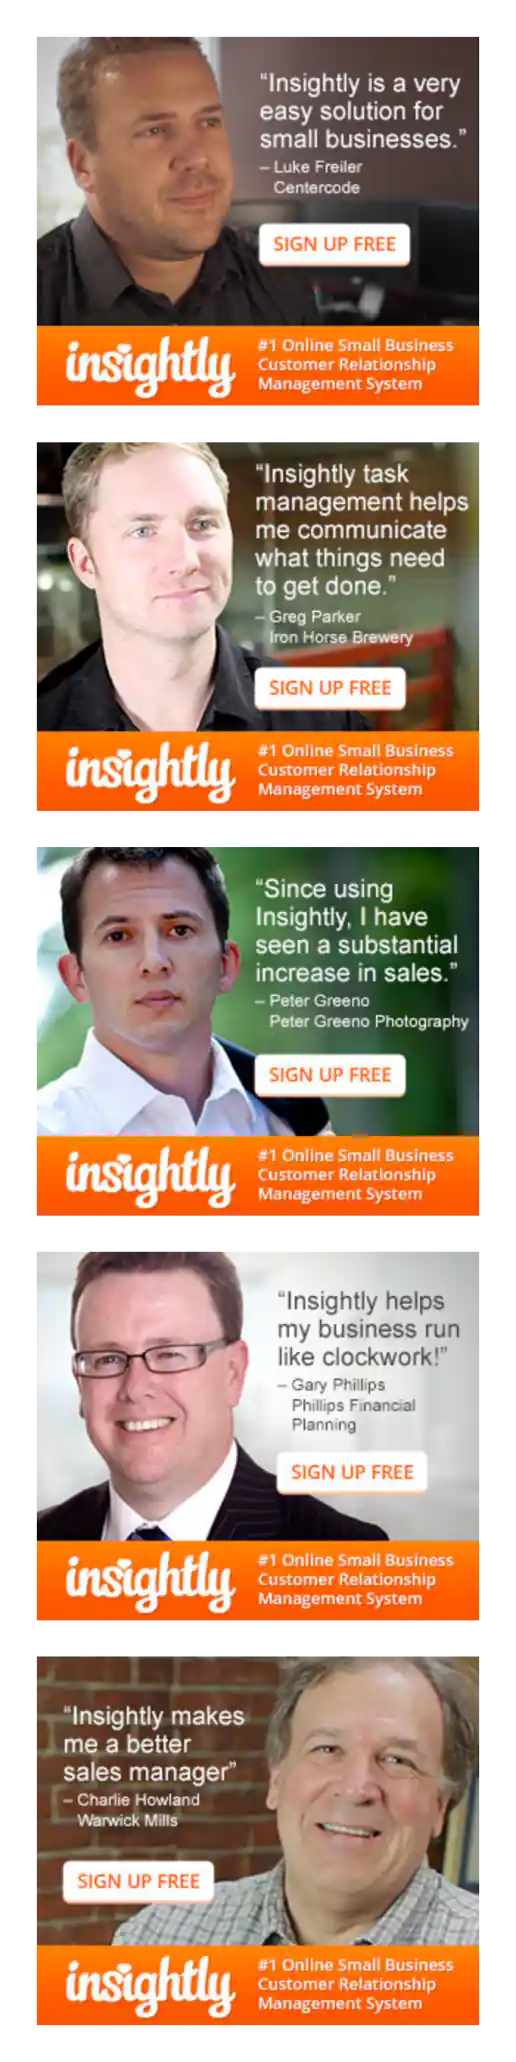 Insightly Customer Testimonial Banner Ads project image